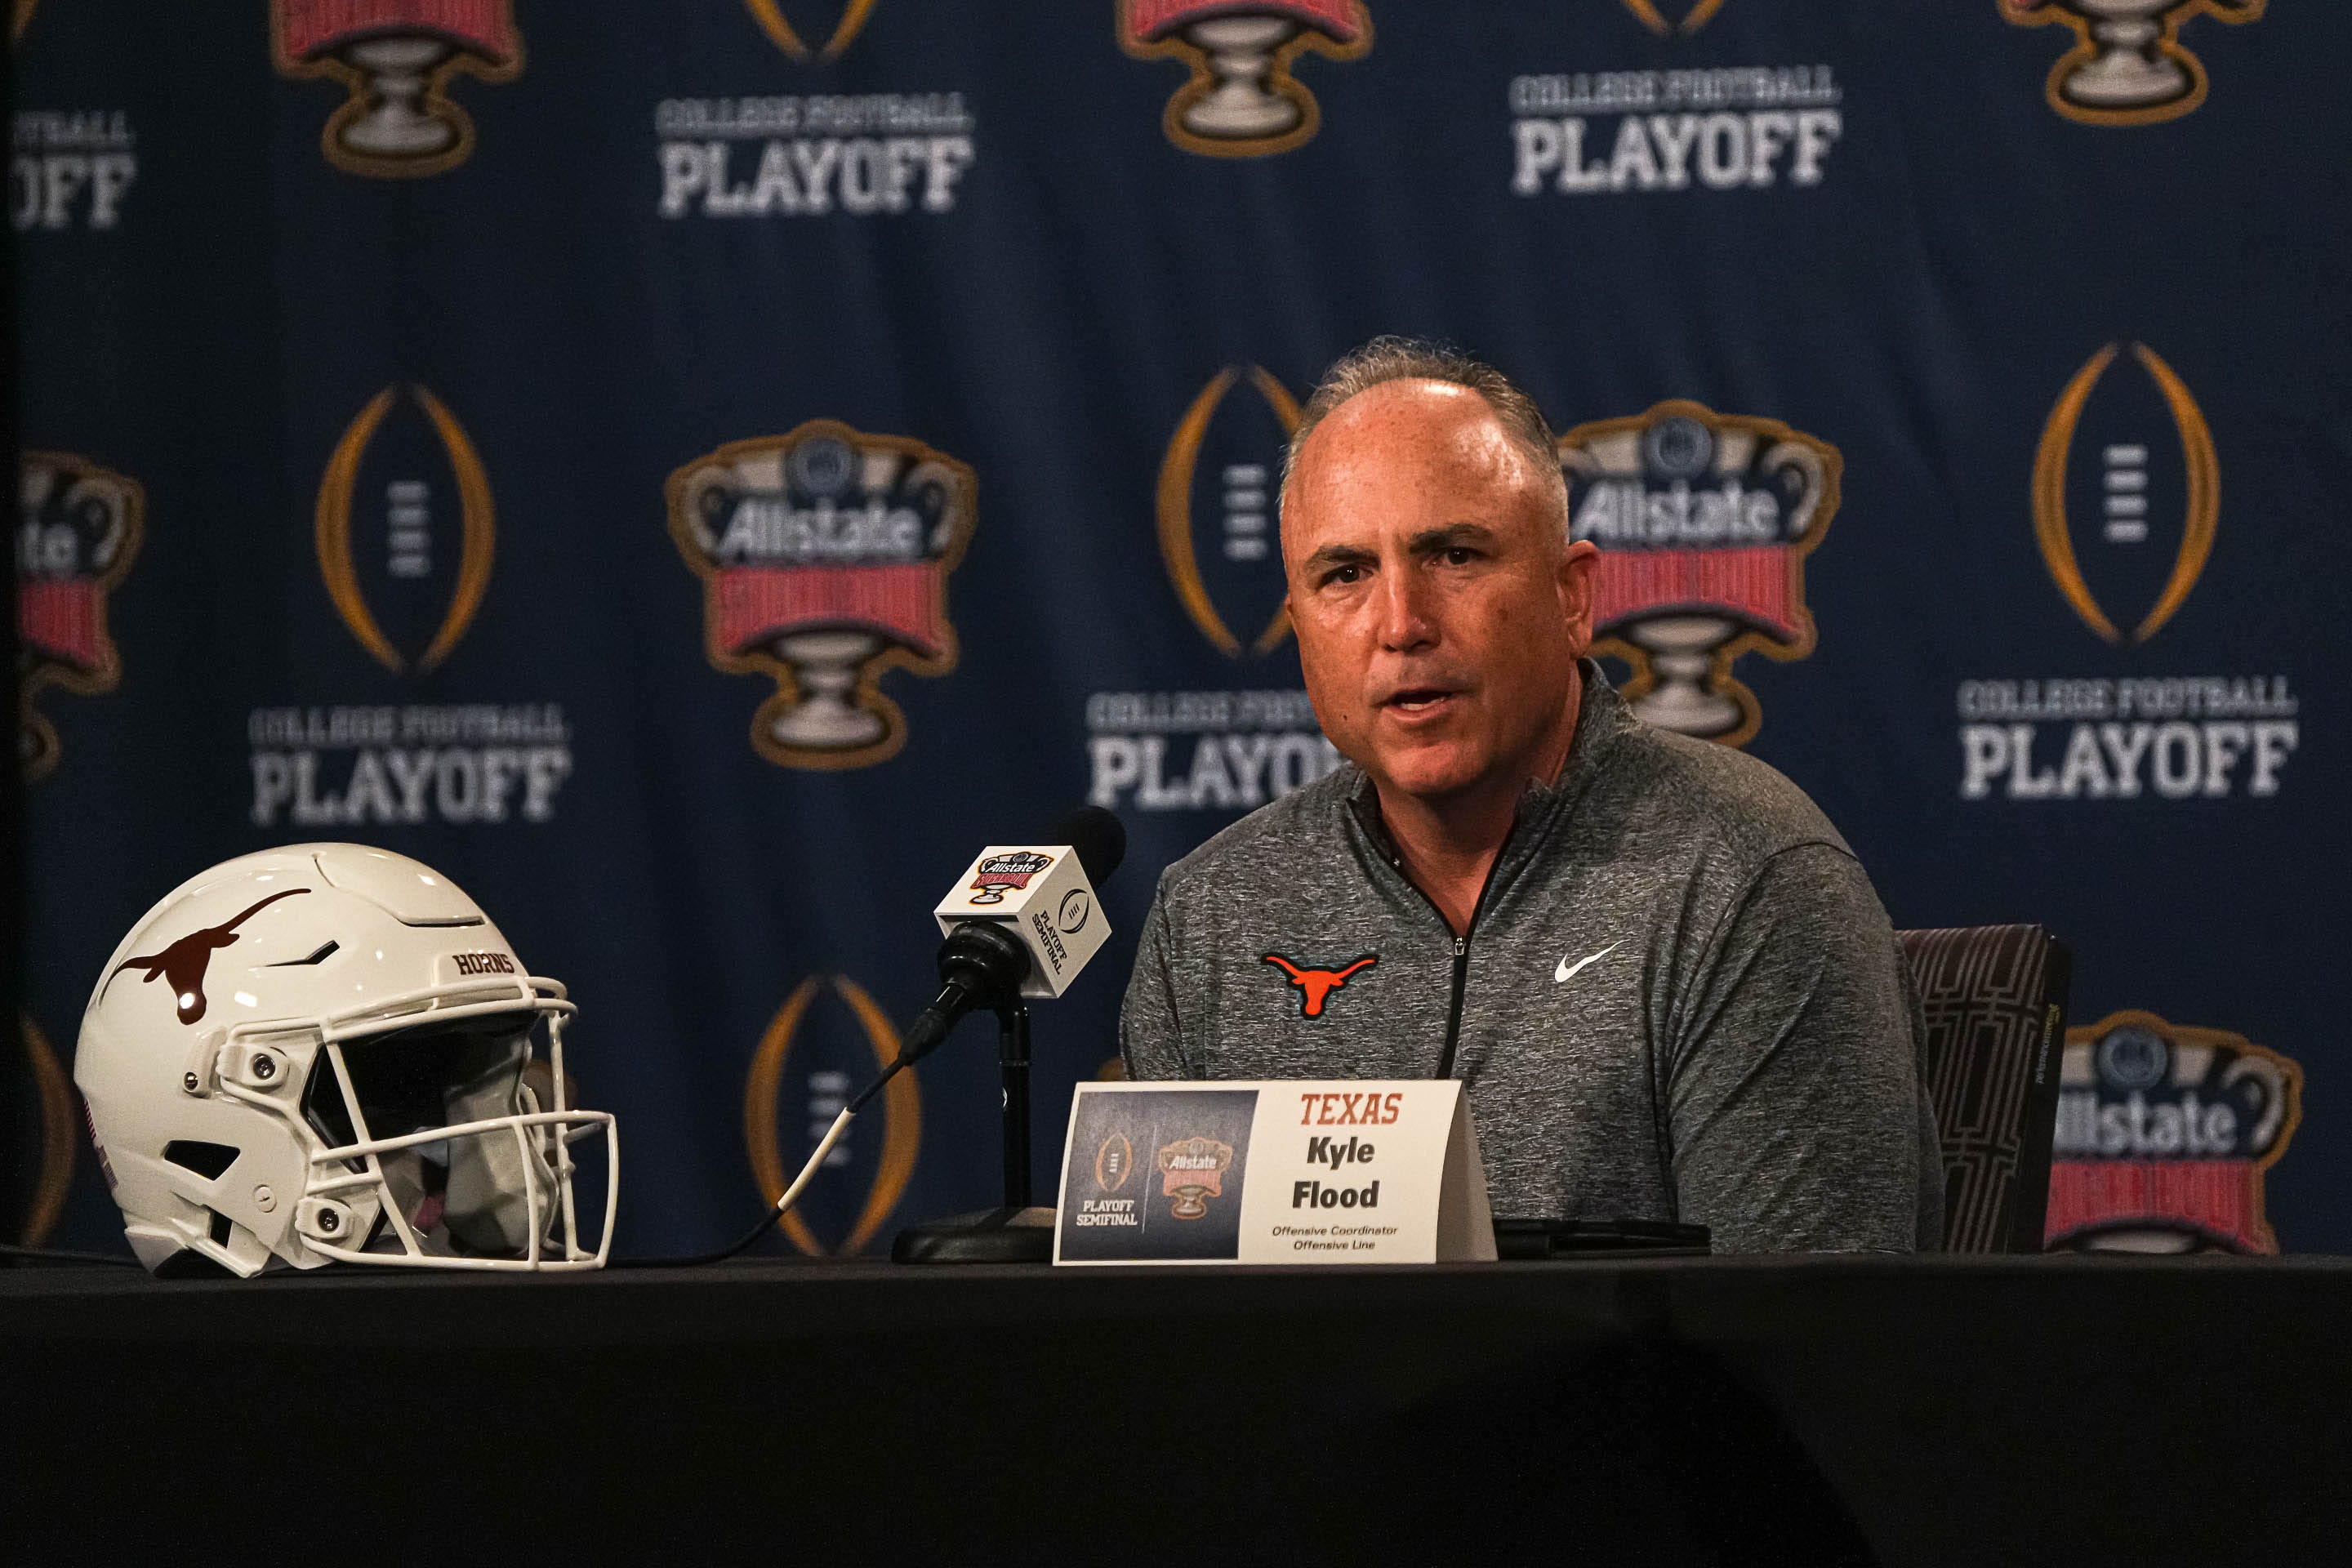 Texas Longhorns offensive coordinator Kyle Flood speaks to media at the Sheraton Hotel on Friday, Dec. 29, 2023 in New Orleans, Louisiana. The Texas Longhorns will face the Washington Huskies in the Sugar Bowl on January 1, 2024.